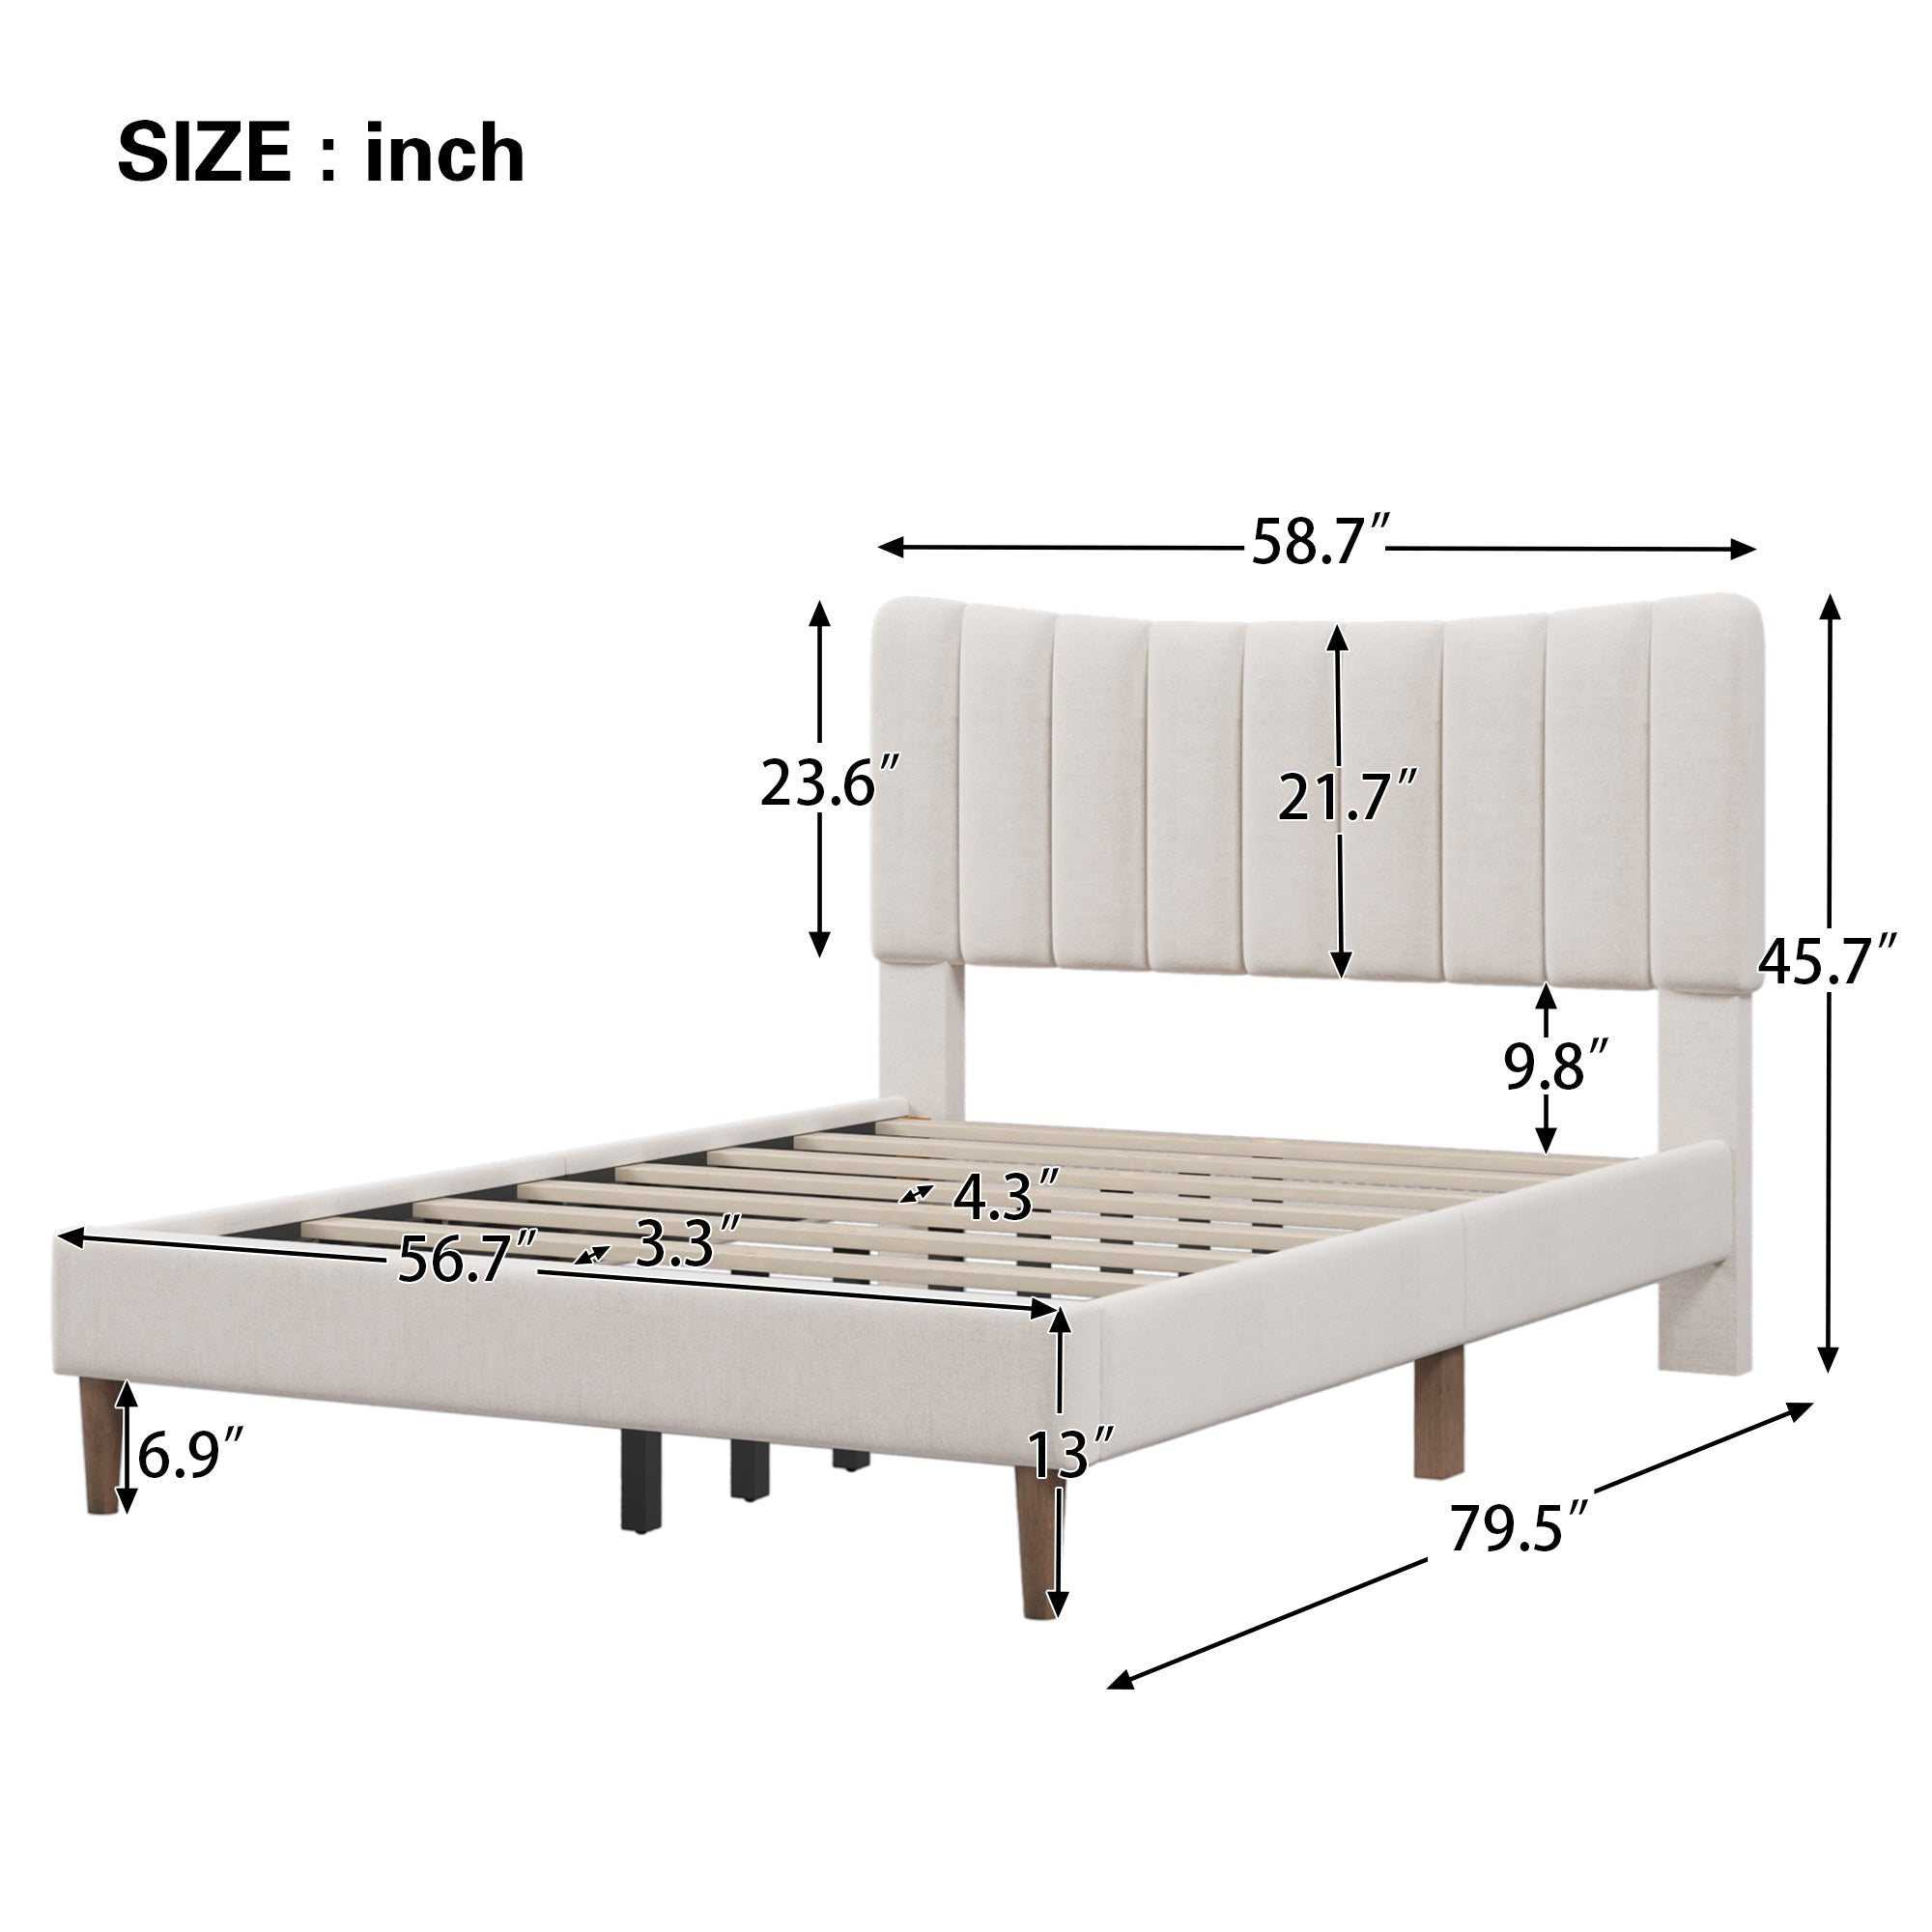 Full Bed - Upholstered Platform Bed Frame with Vertical Channel Tufted Headboard, No Box Spring Needed - Cream